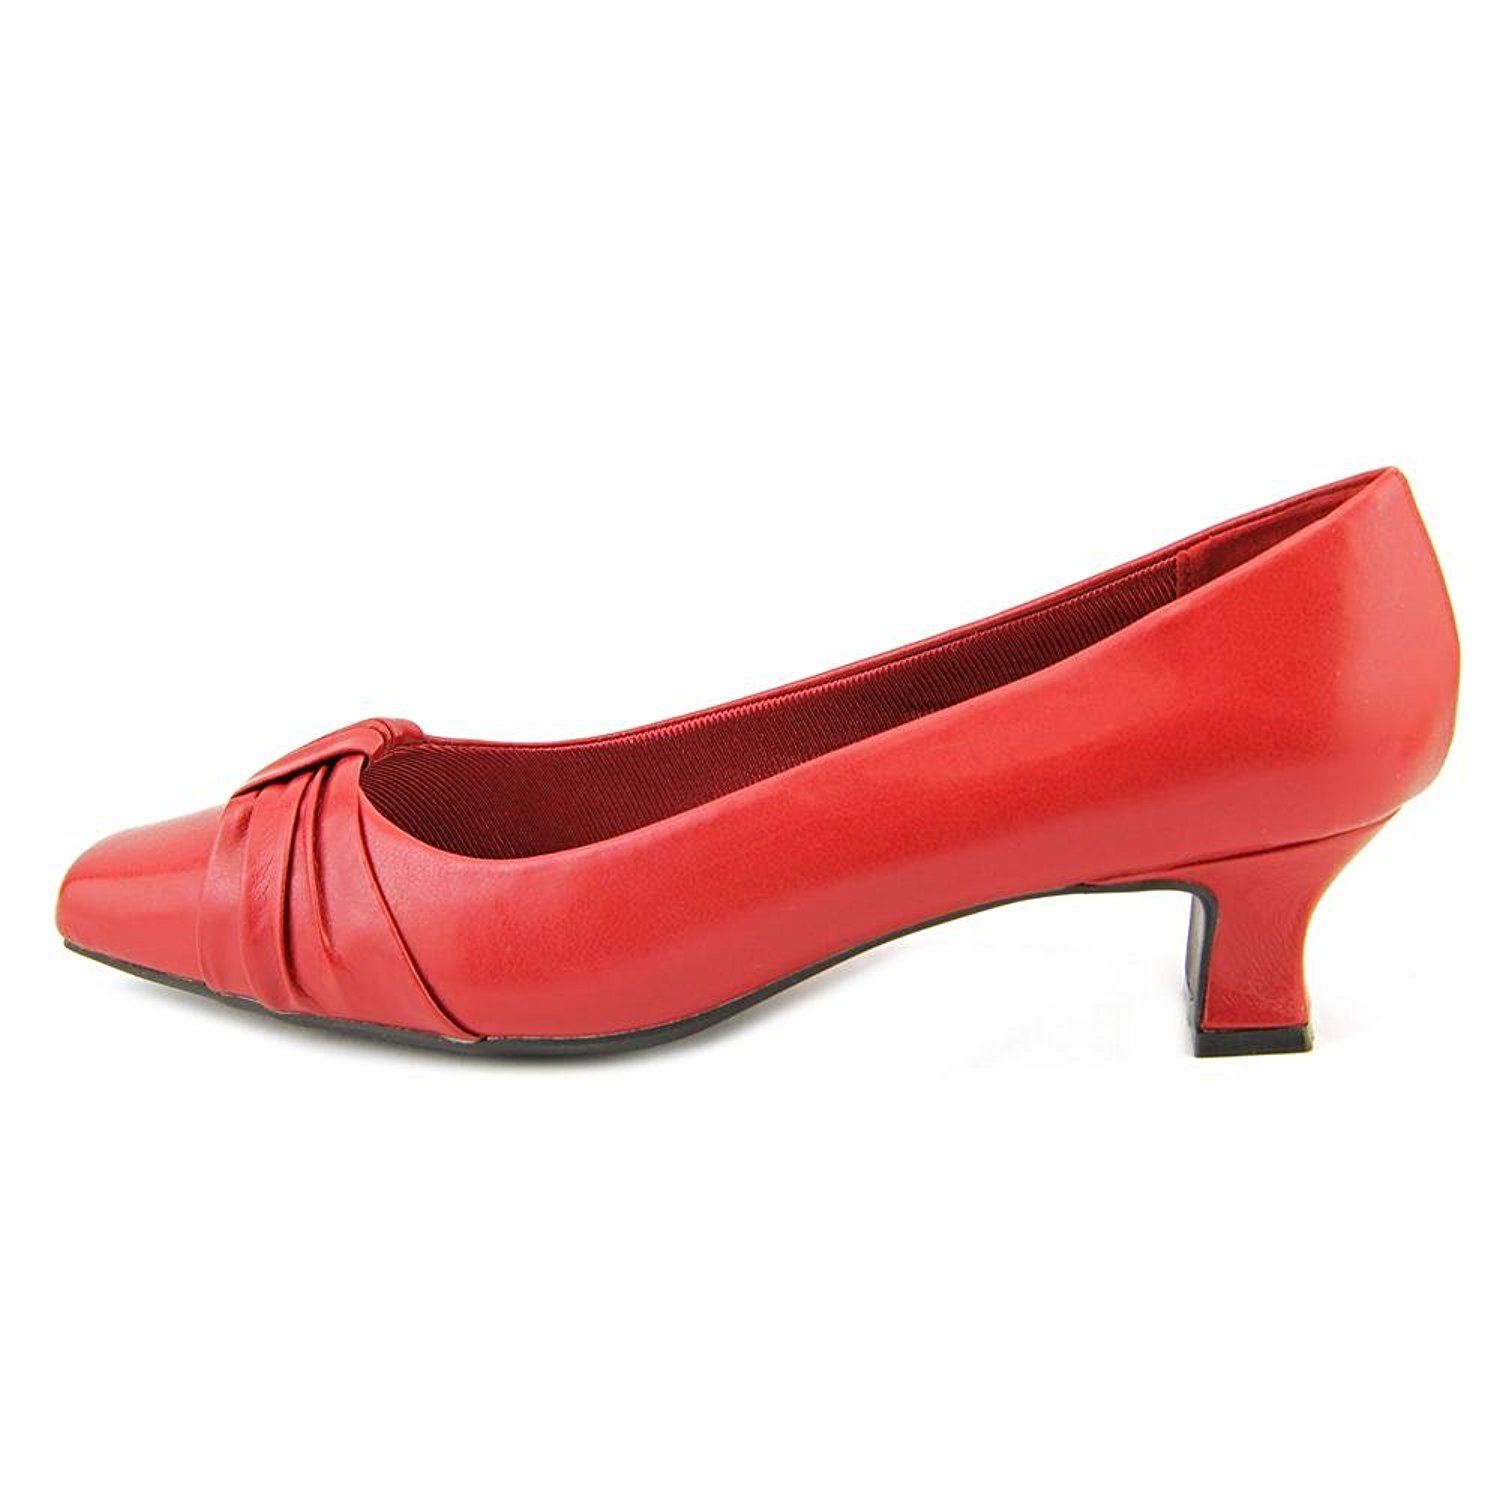 Easy Street Womens Waive Closed Toe Classic Pumps, Red, Size 6.5 rWOf ...